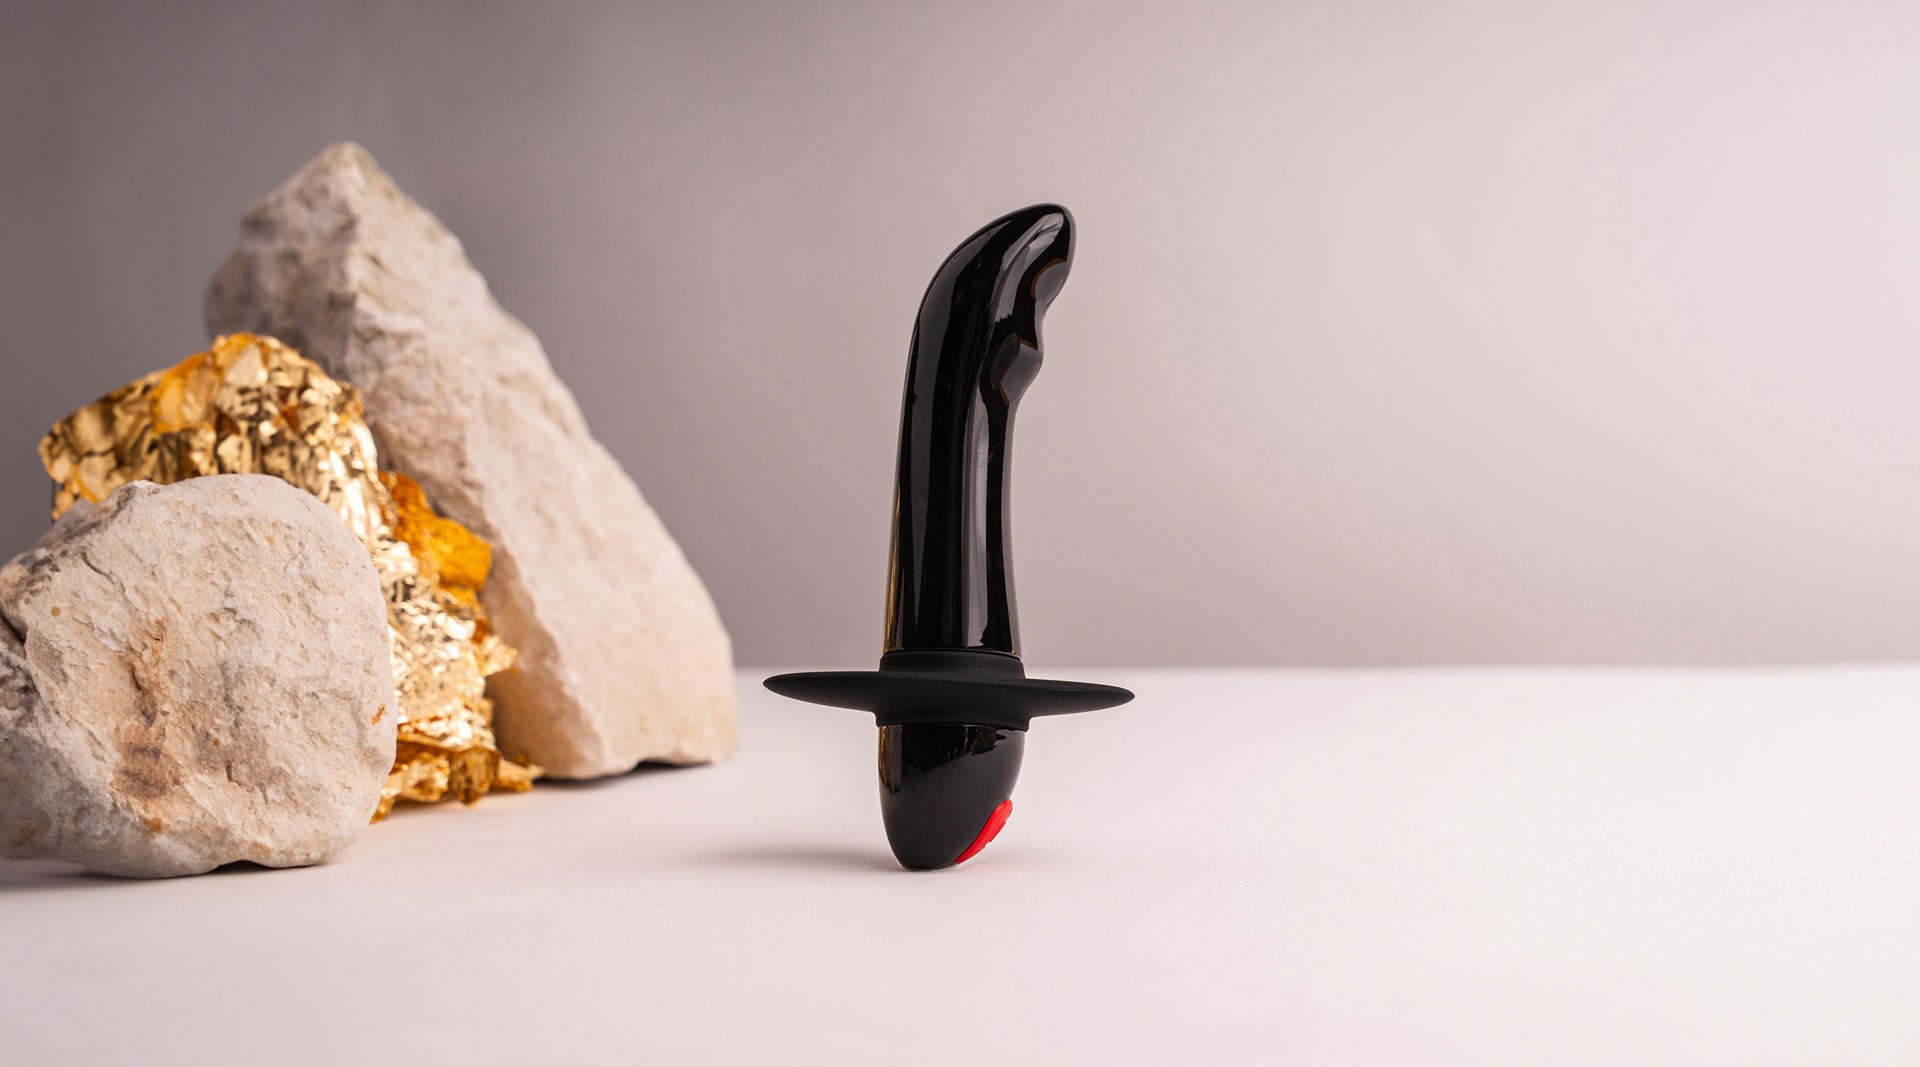 Small black prostate vibrator with a safety flange.